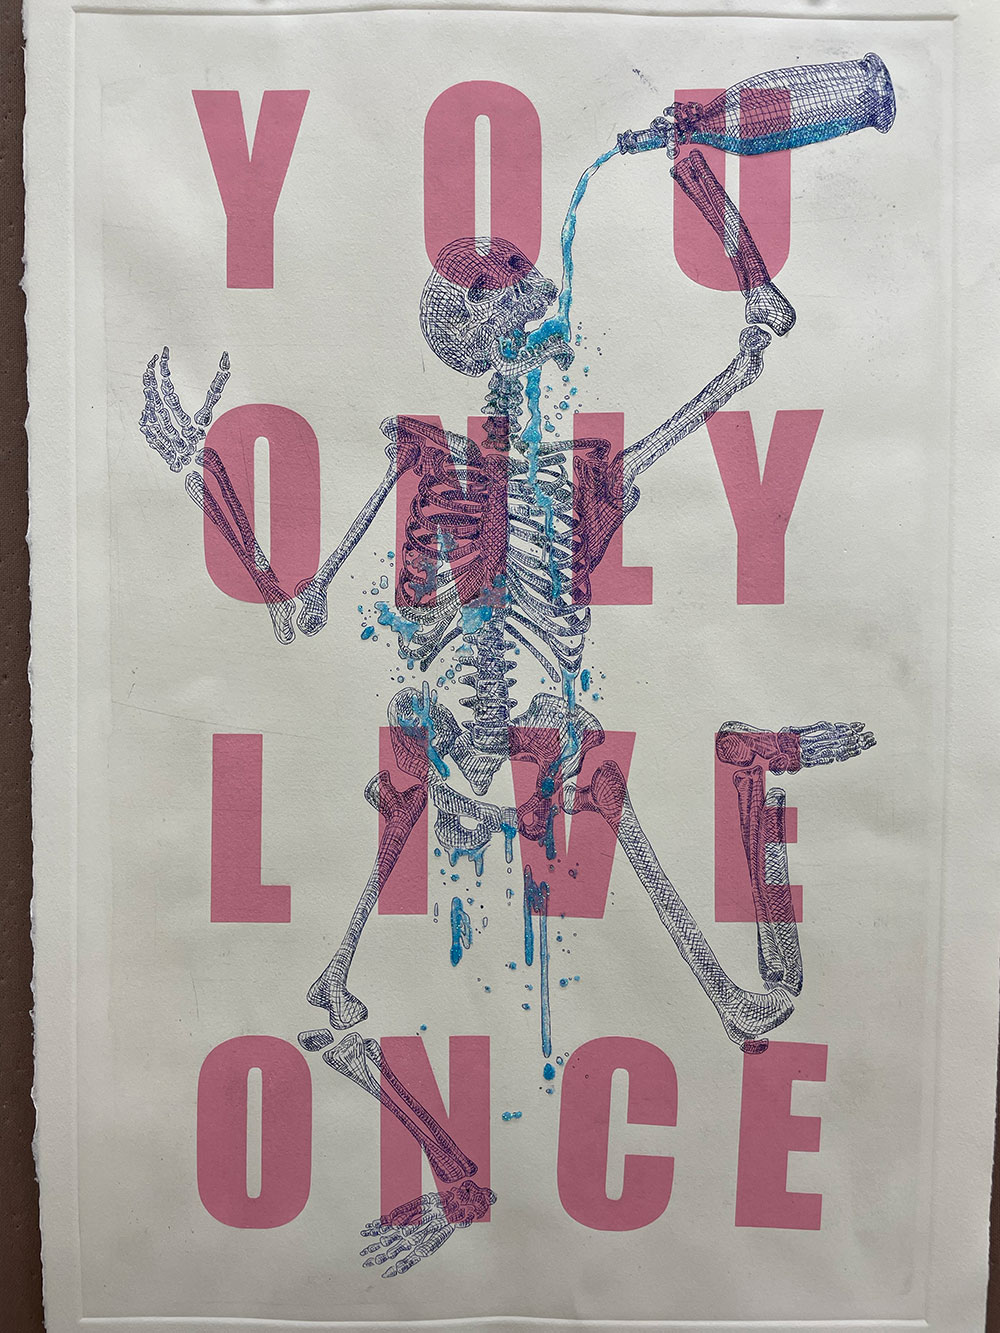 A colored printed image of a dancing skeleton pouring a drink down his throat with the words written across "You only live once"